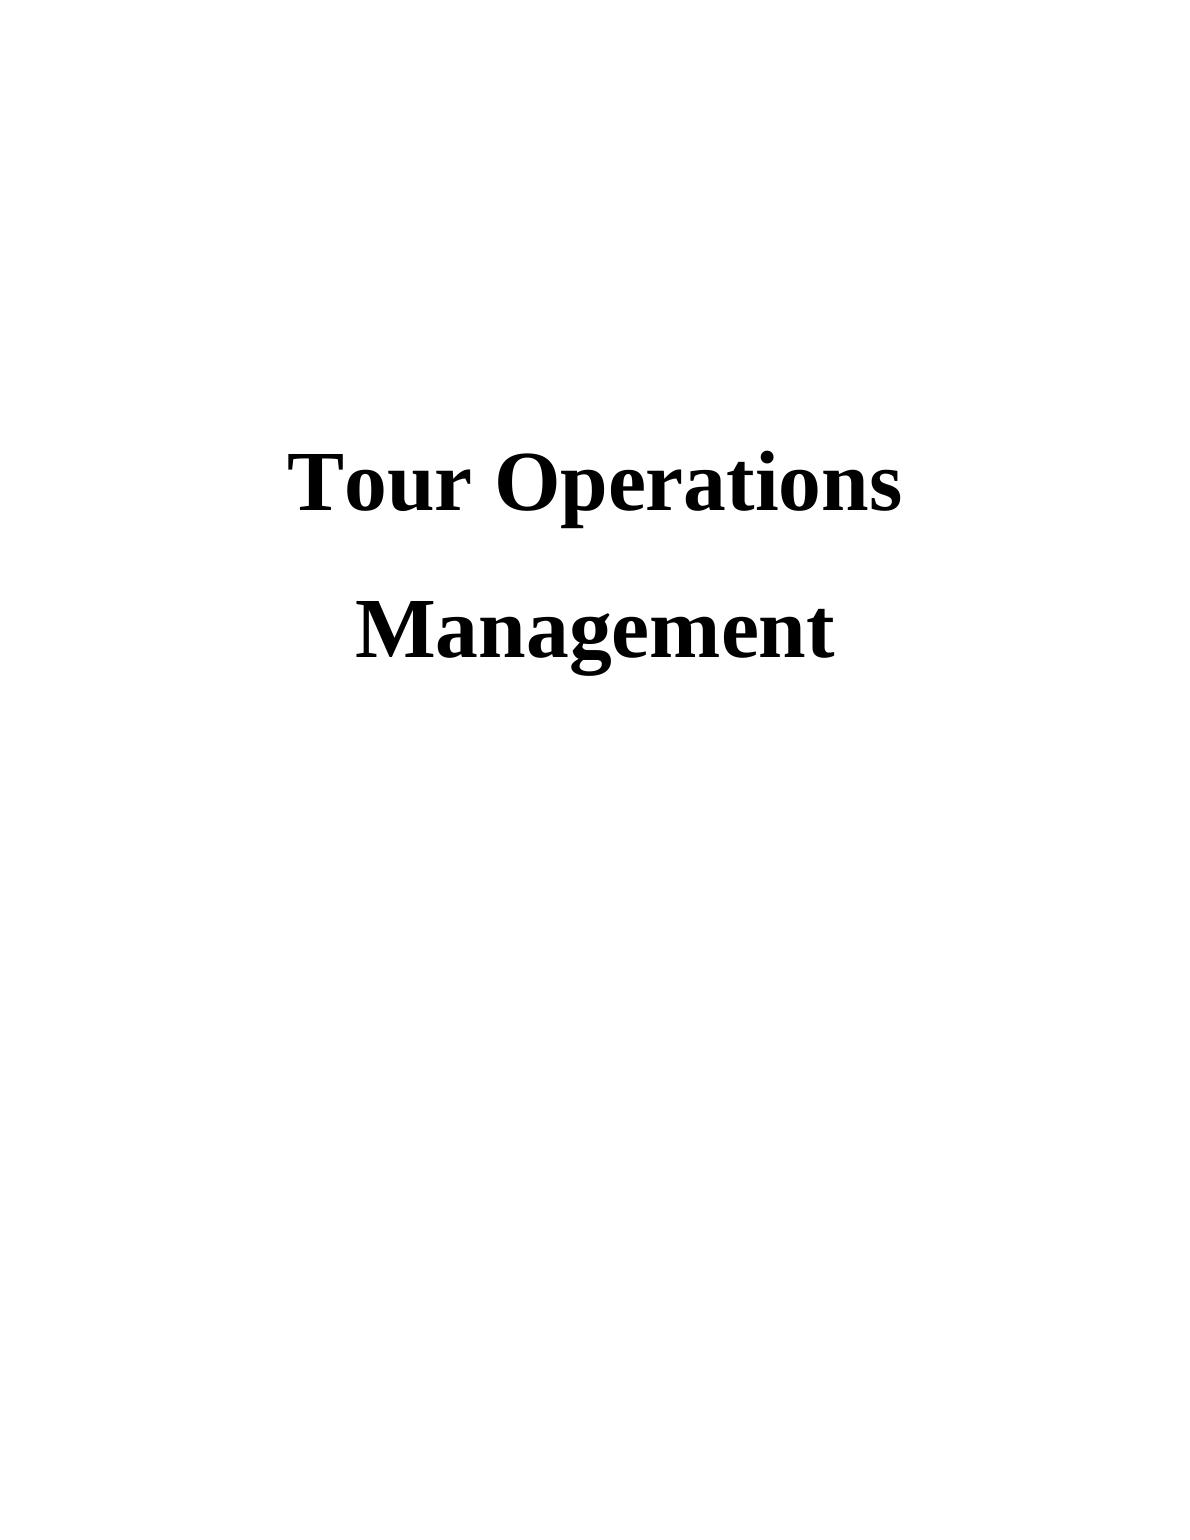 Tour Operations Management of Thomas Cook and Cox & Kings (C&K)_1